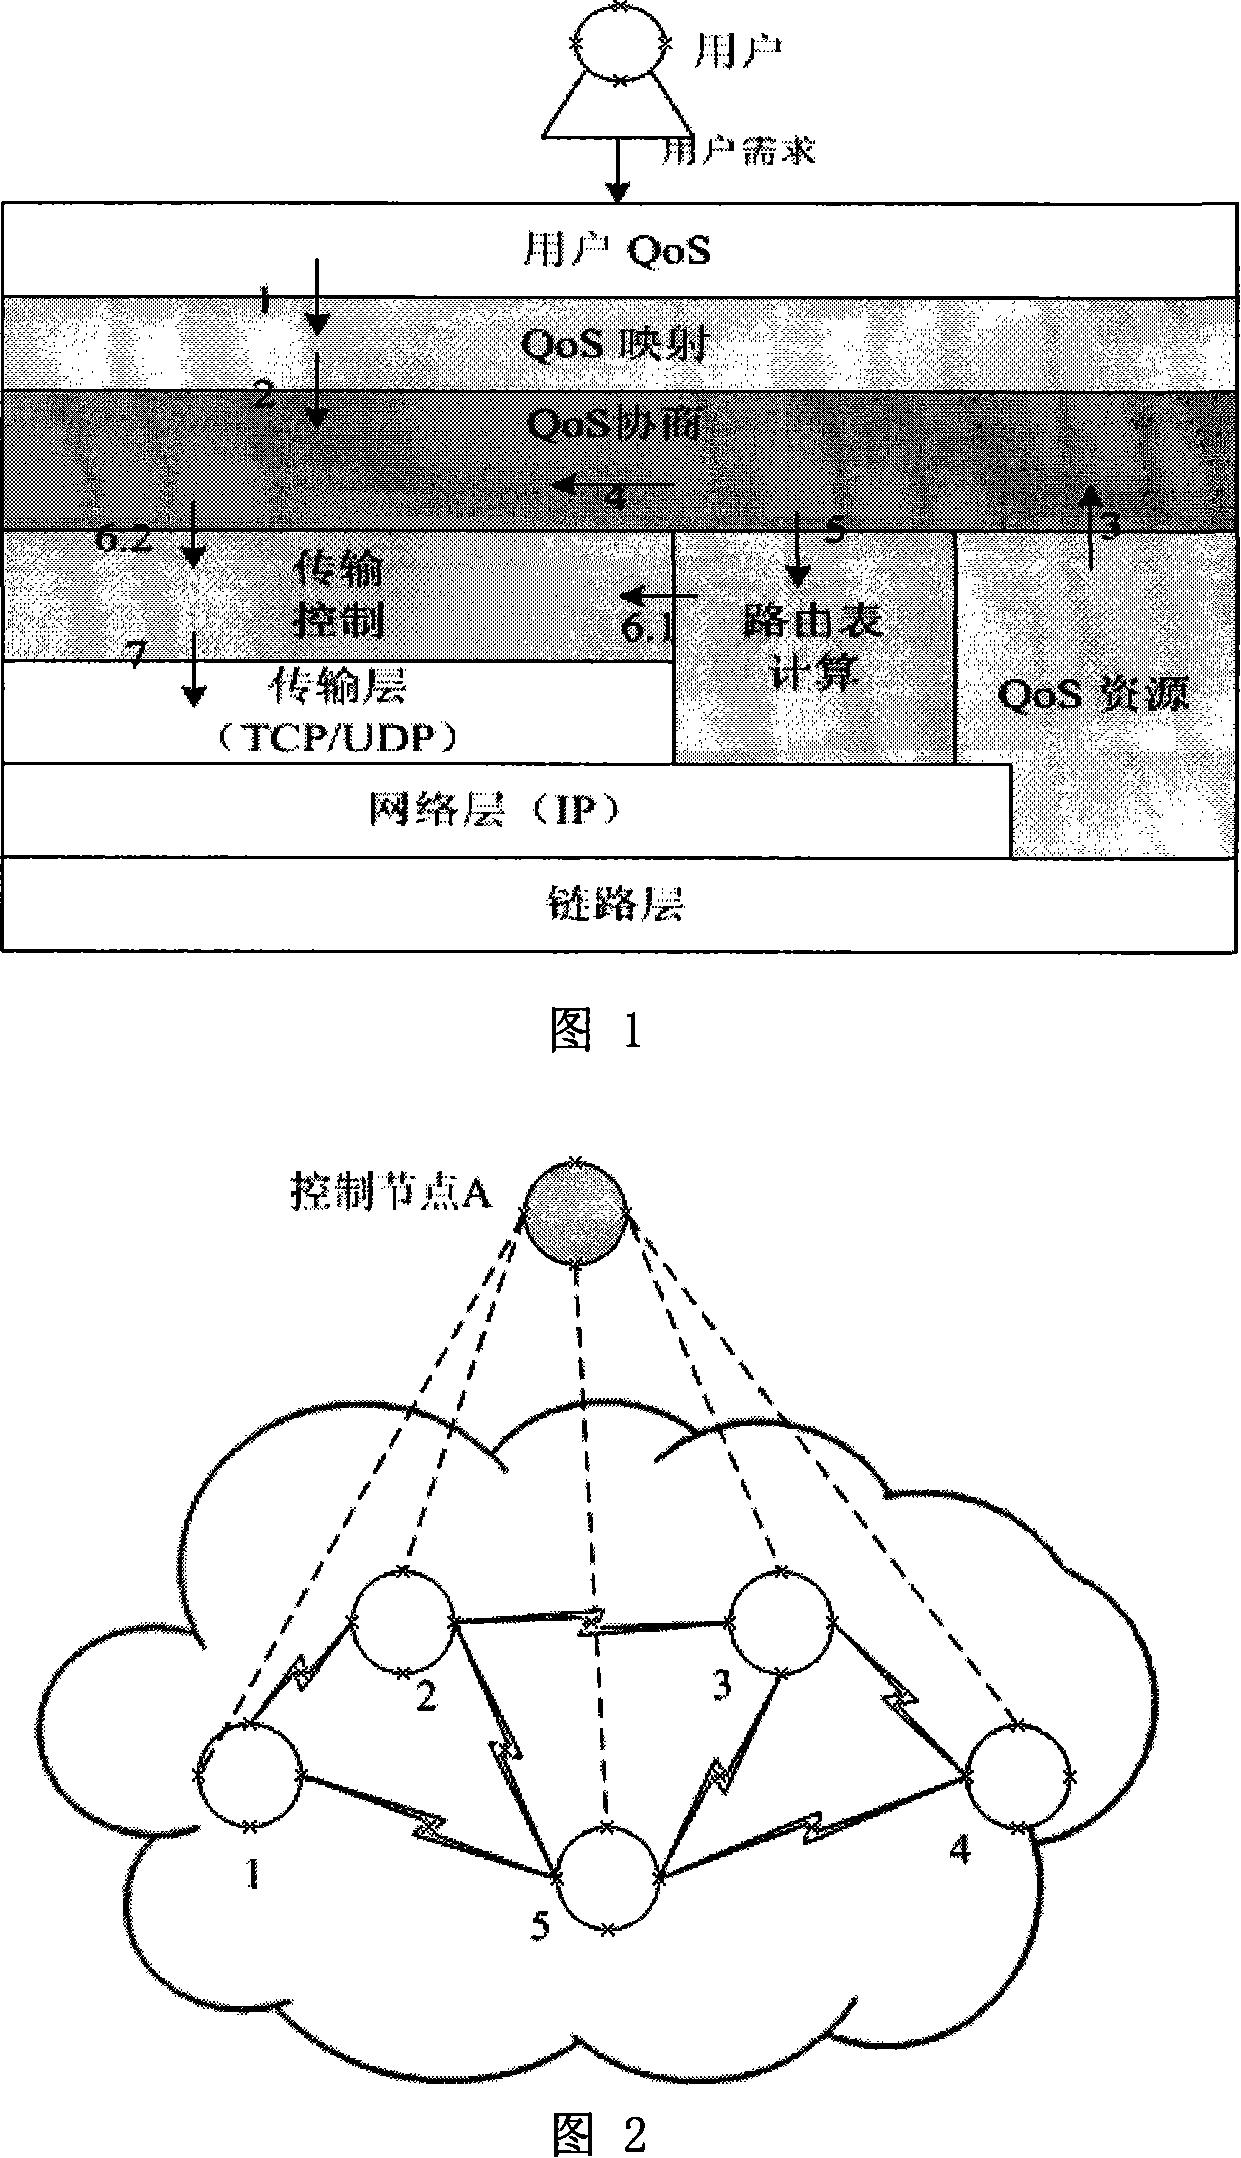 Routing device and method of wireless mobile self-organizing network of dynamic assurance service quality